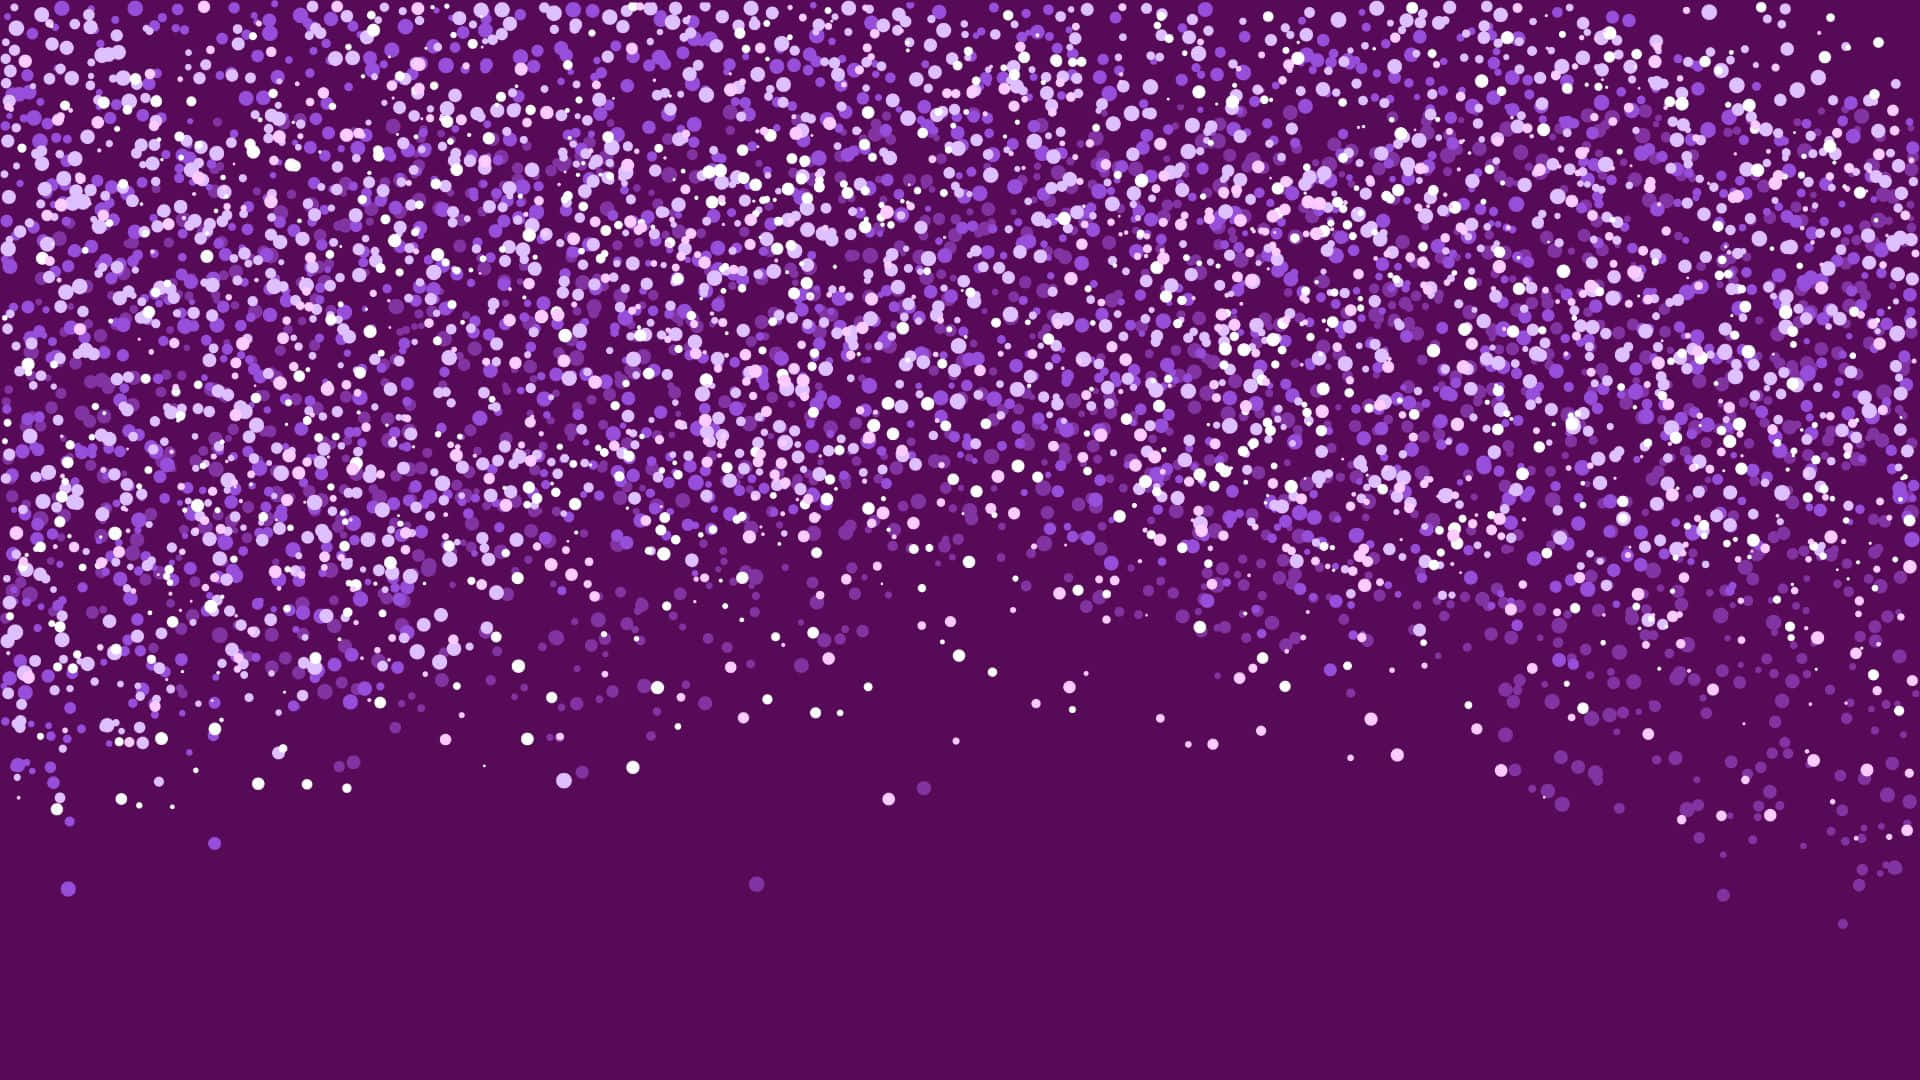 Capture the sparkle of the night sky with this stunning purple sparkle background.